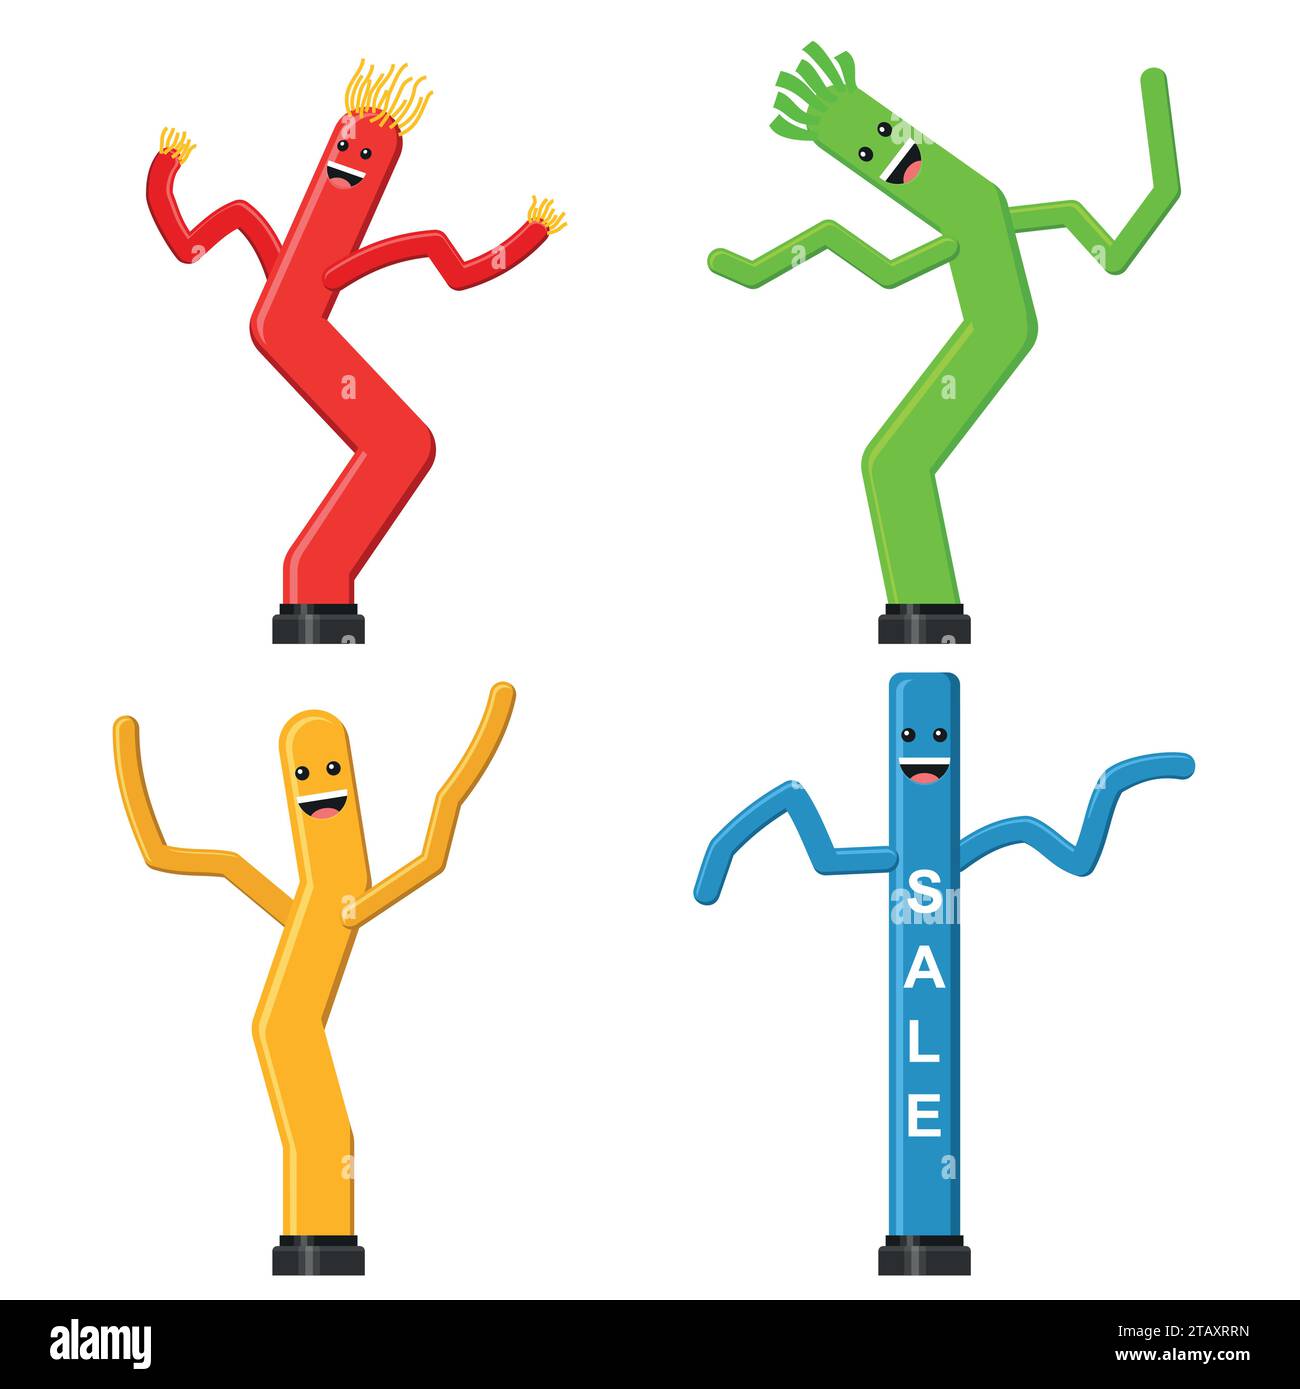 Dancing inflatable tube man set in flat style isolated on white background. Wacky waving air hand for sales and advertising. Vector illustration Stock Vector